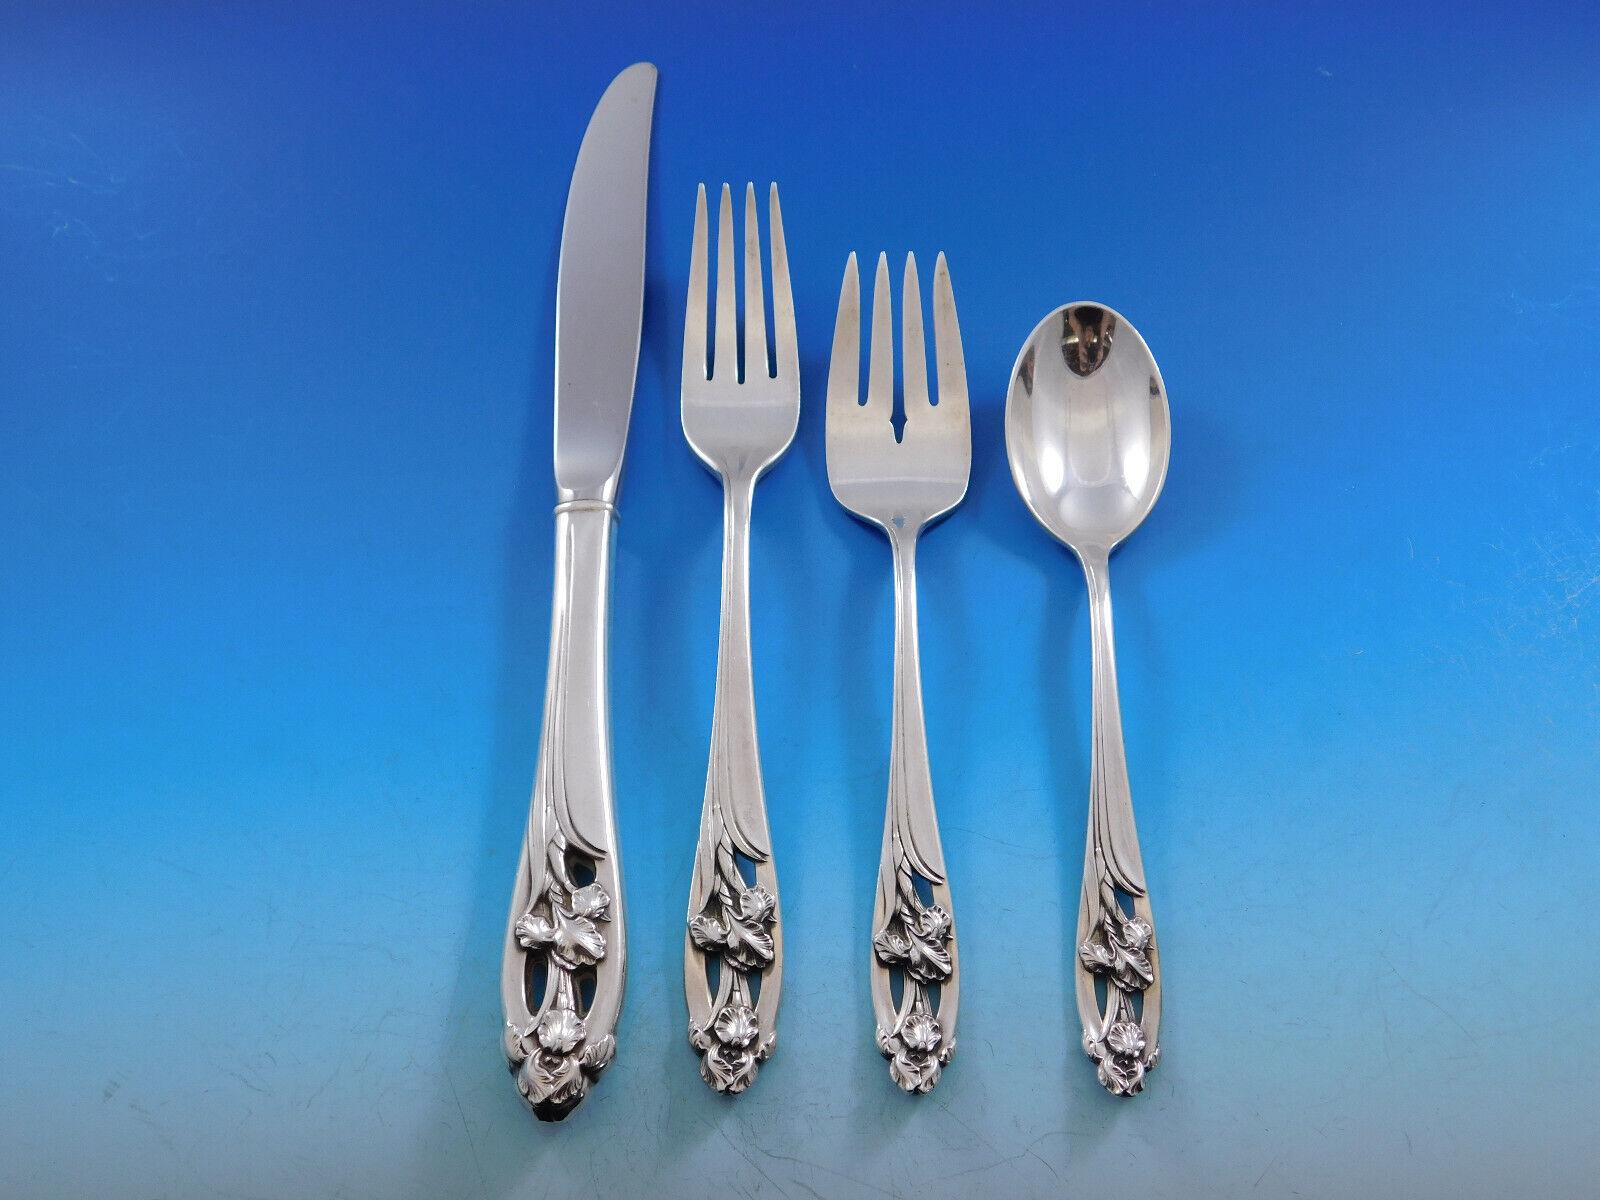 Gorgeous Silver Iris by International sterling silver flatware set with pierced handles and high relief iris detailing - 43 pieces. This set includes:

8 Knives, 9 1/4